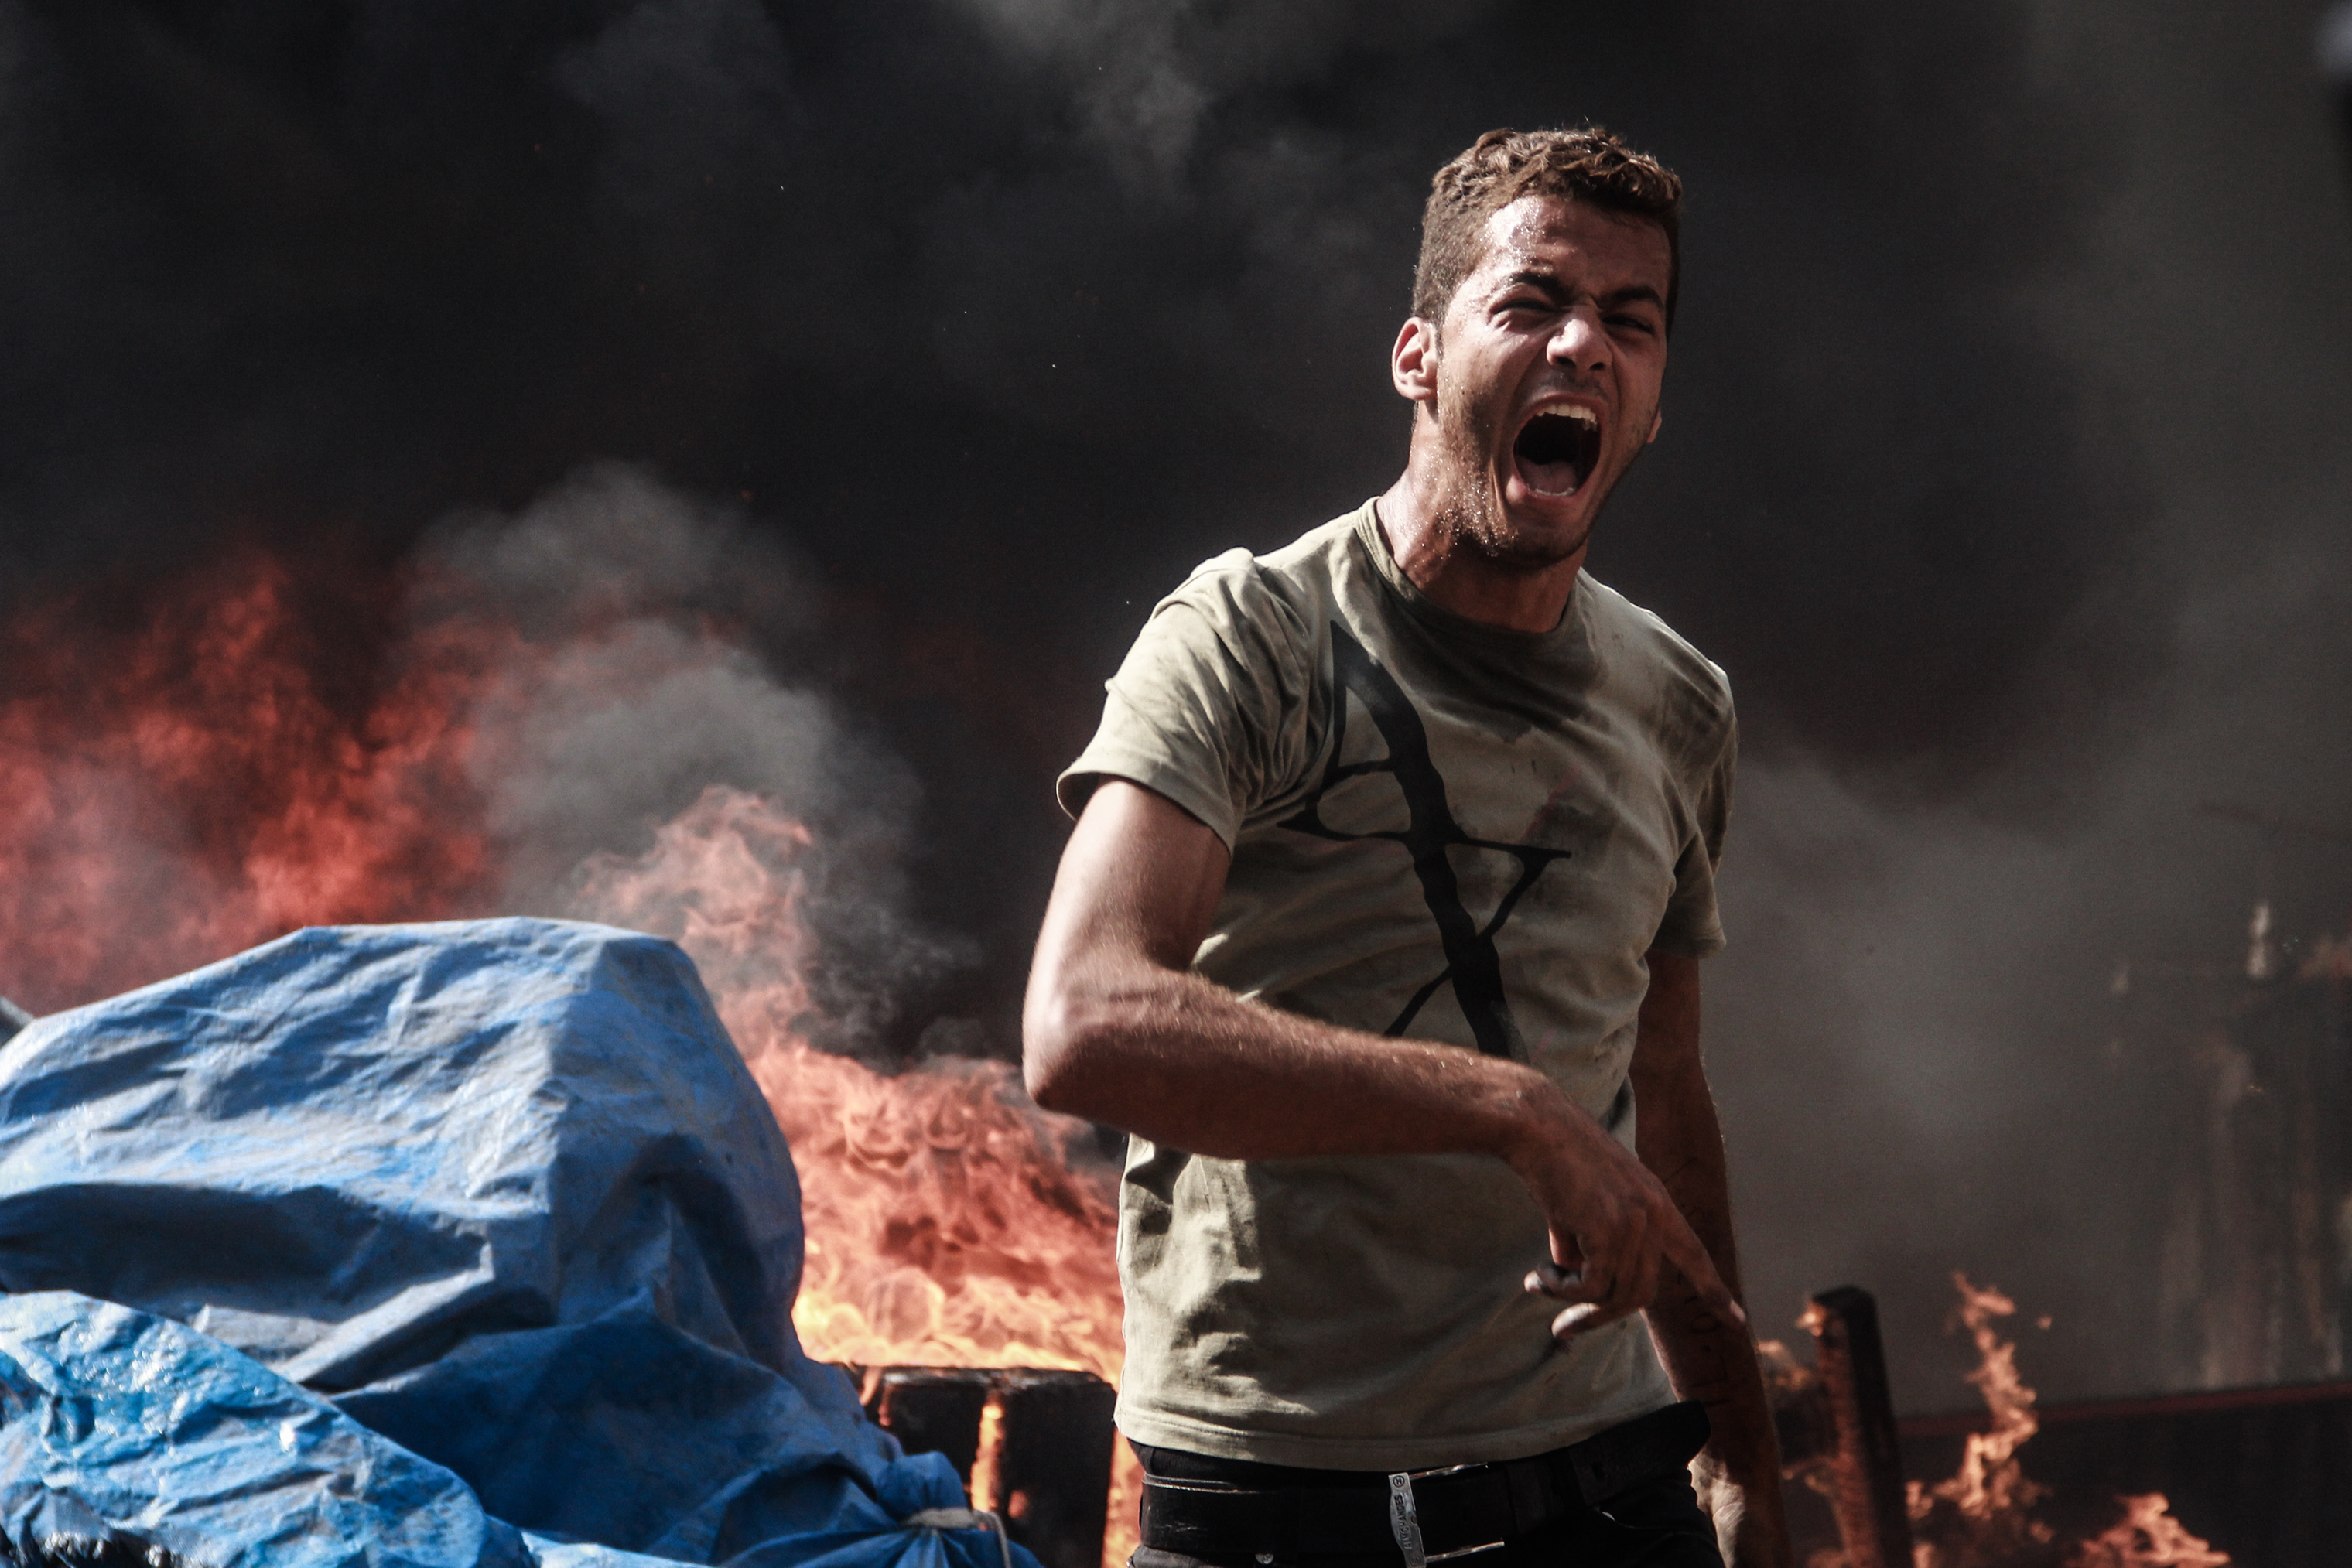 A man yells in the burning ruins of the square. (Mosa’ab Elshamy)